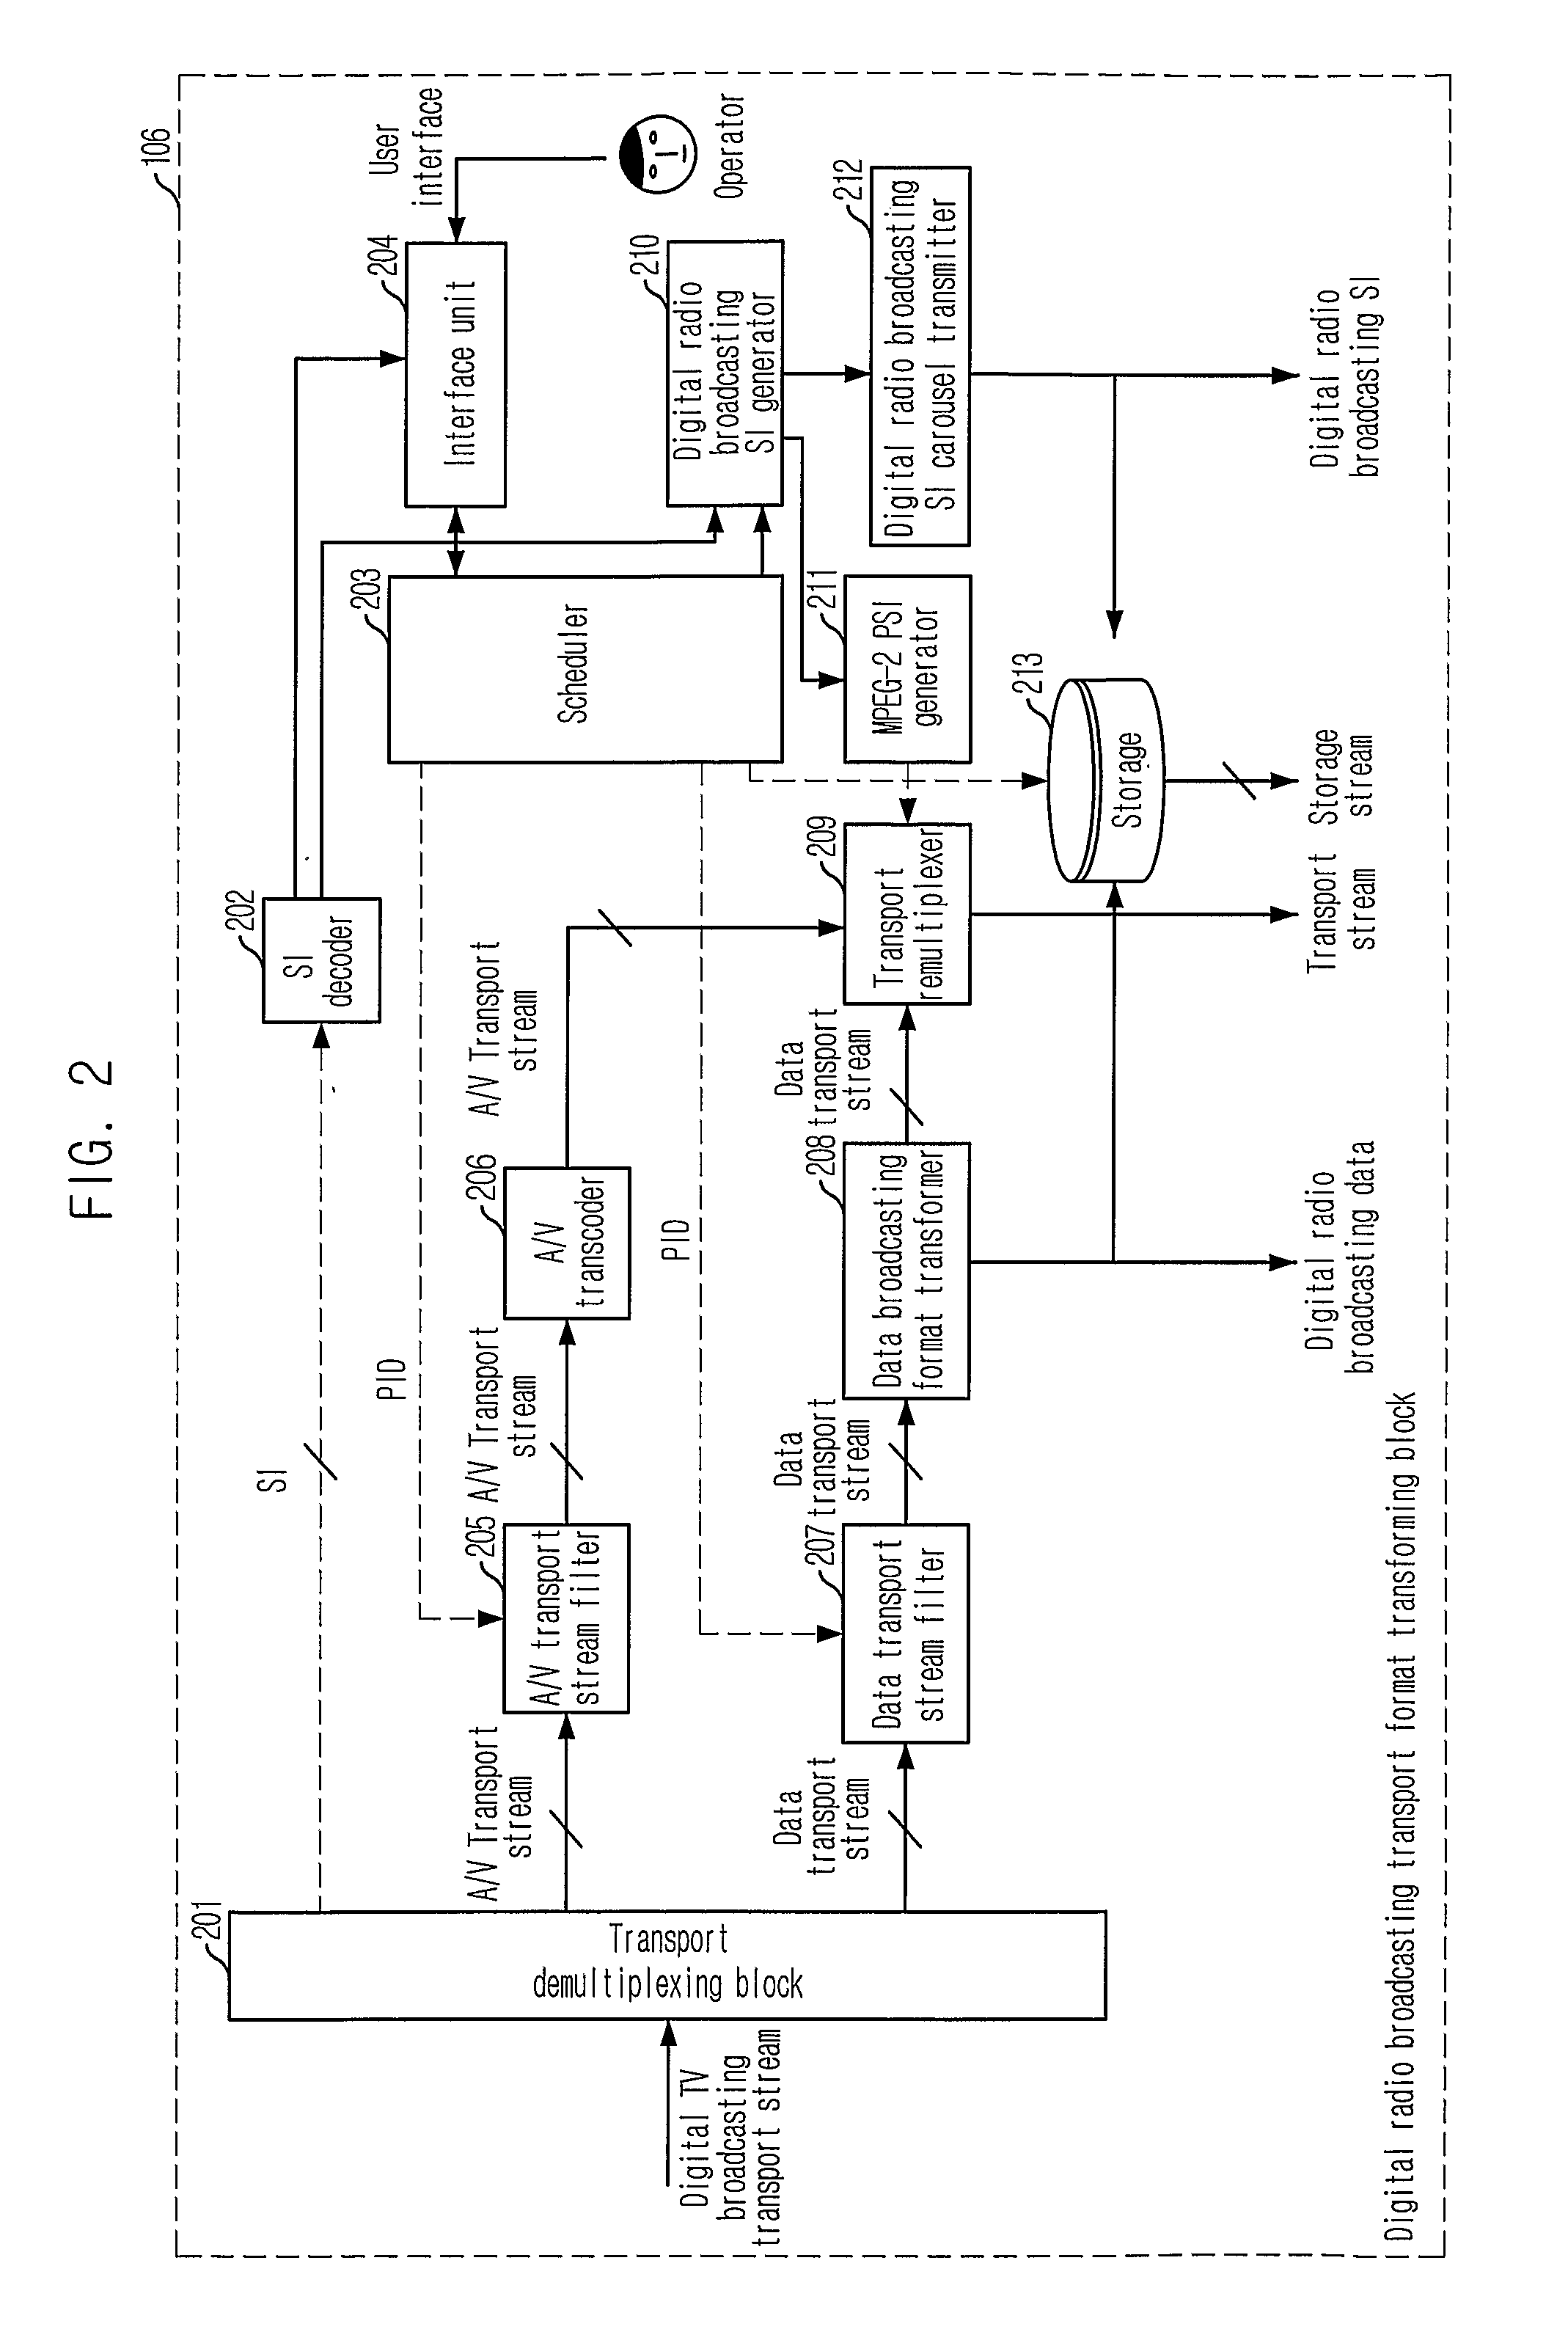 Apparatus and Method for Transforming a Digital Tv Broadcasting Signal to a Digital Radio Broadcasting Signal